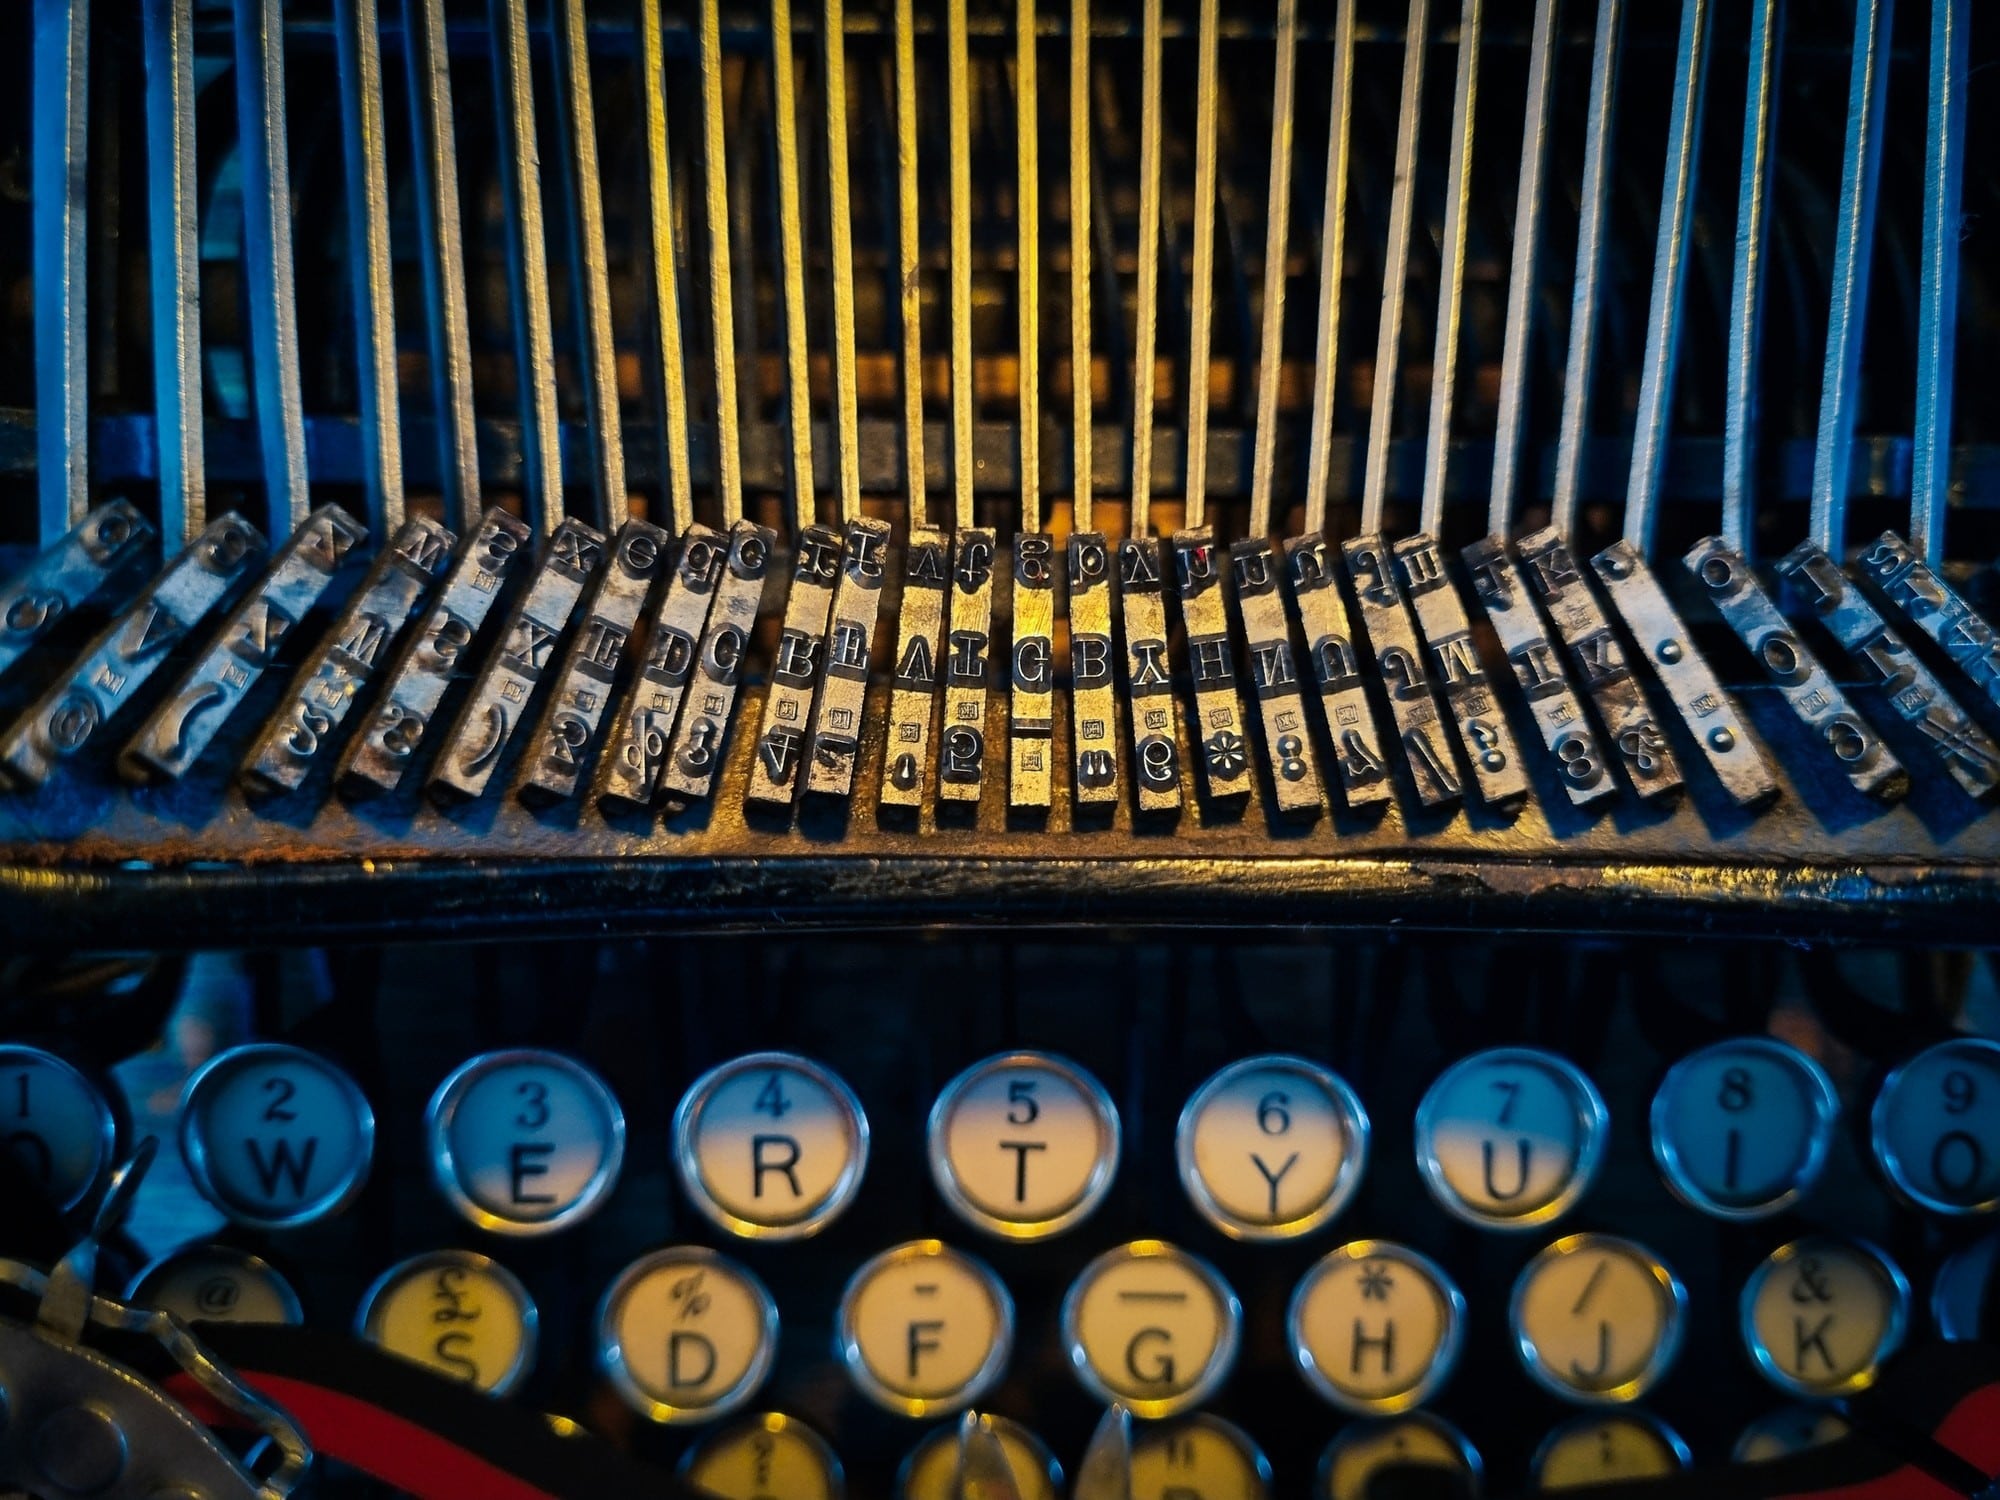 Closeup photo of antique typewriter showing round letter keys and type bar strikers with heavy-contrast lighting shining in center.